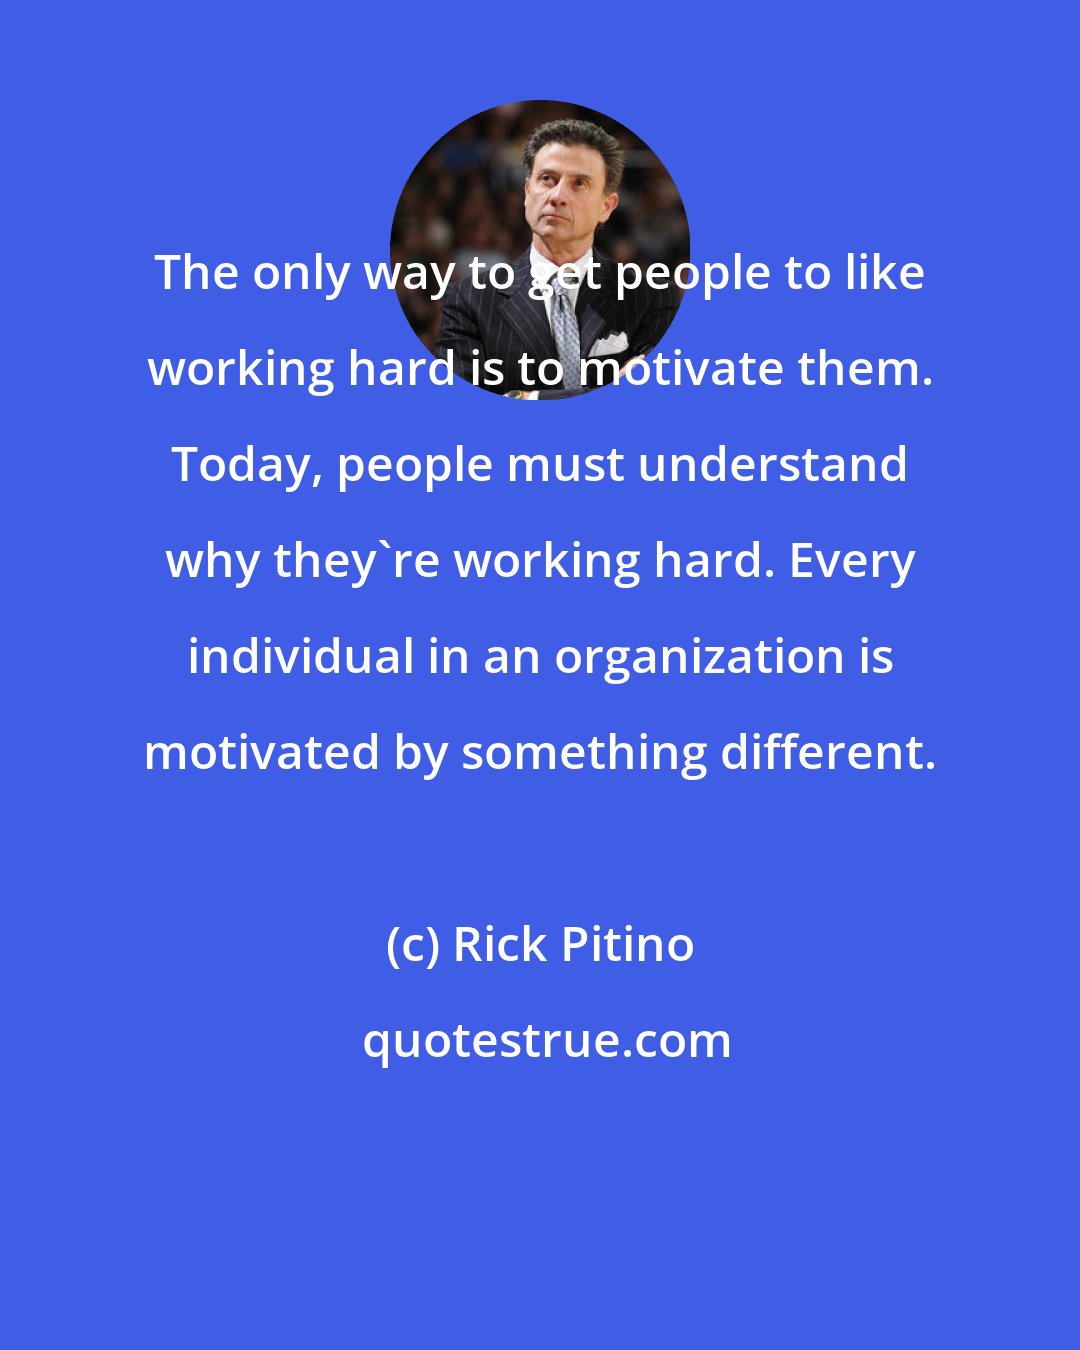 Rick Pitino: The only way to get people to like working hard is to motivate them. Today, people must understand why they're working hard. Every individual in an organization is motivated by something different.